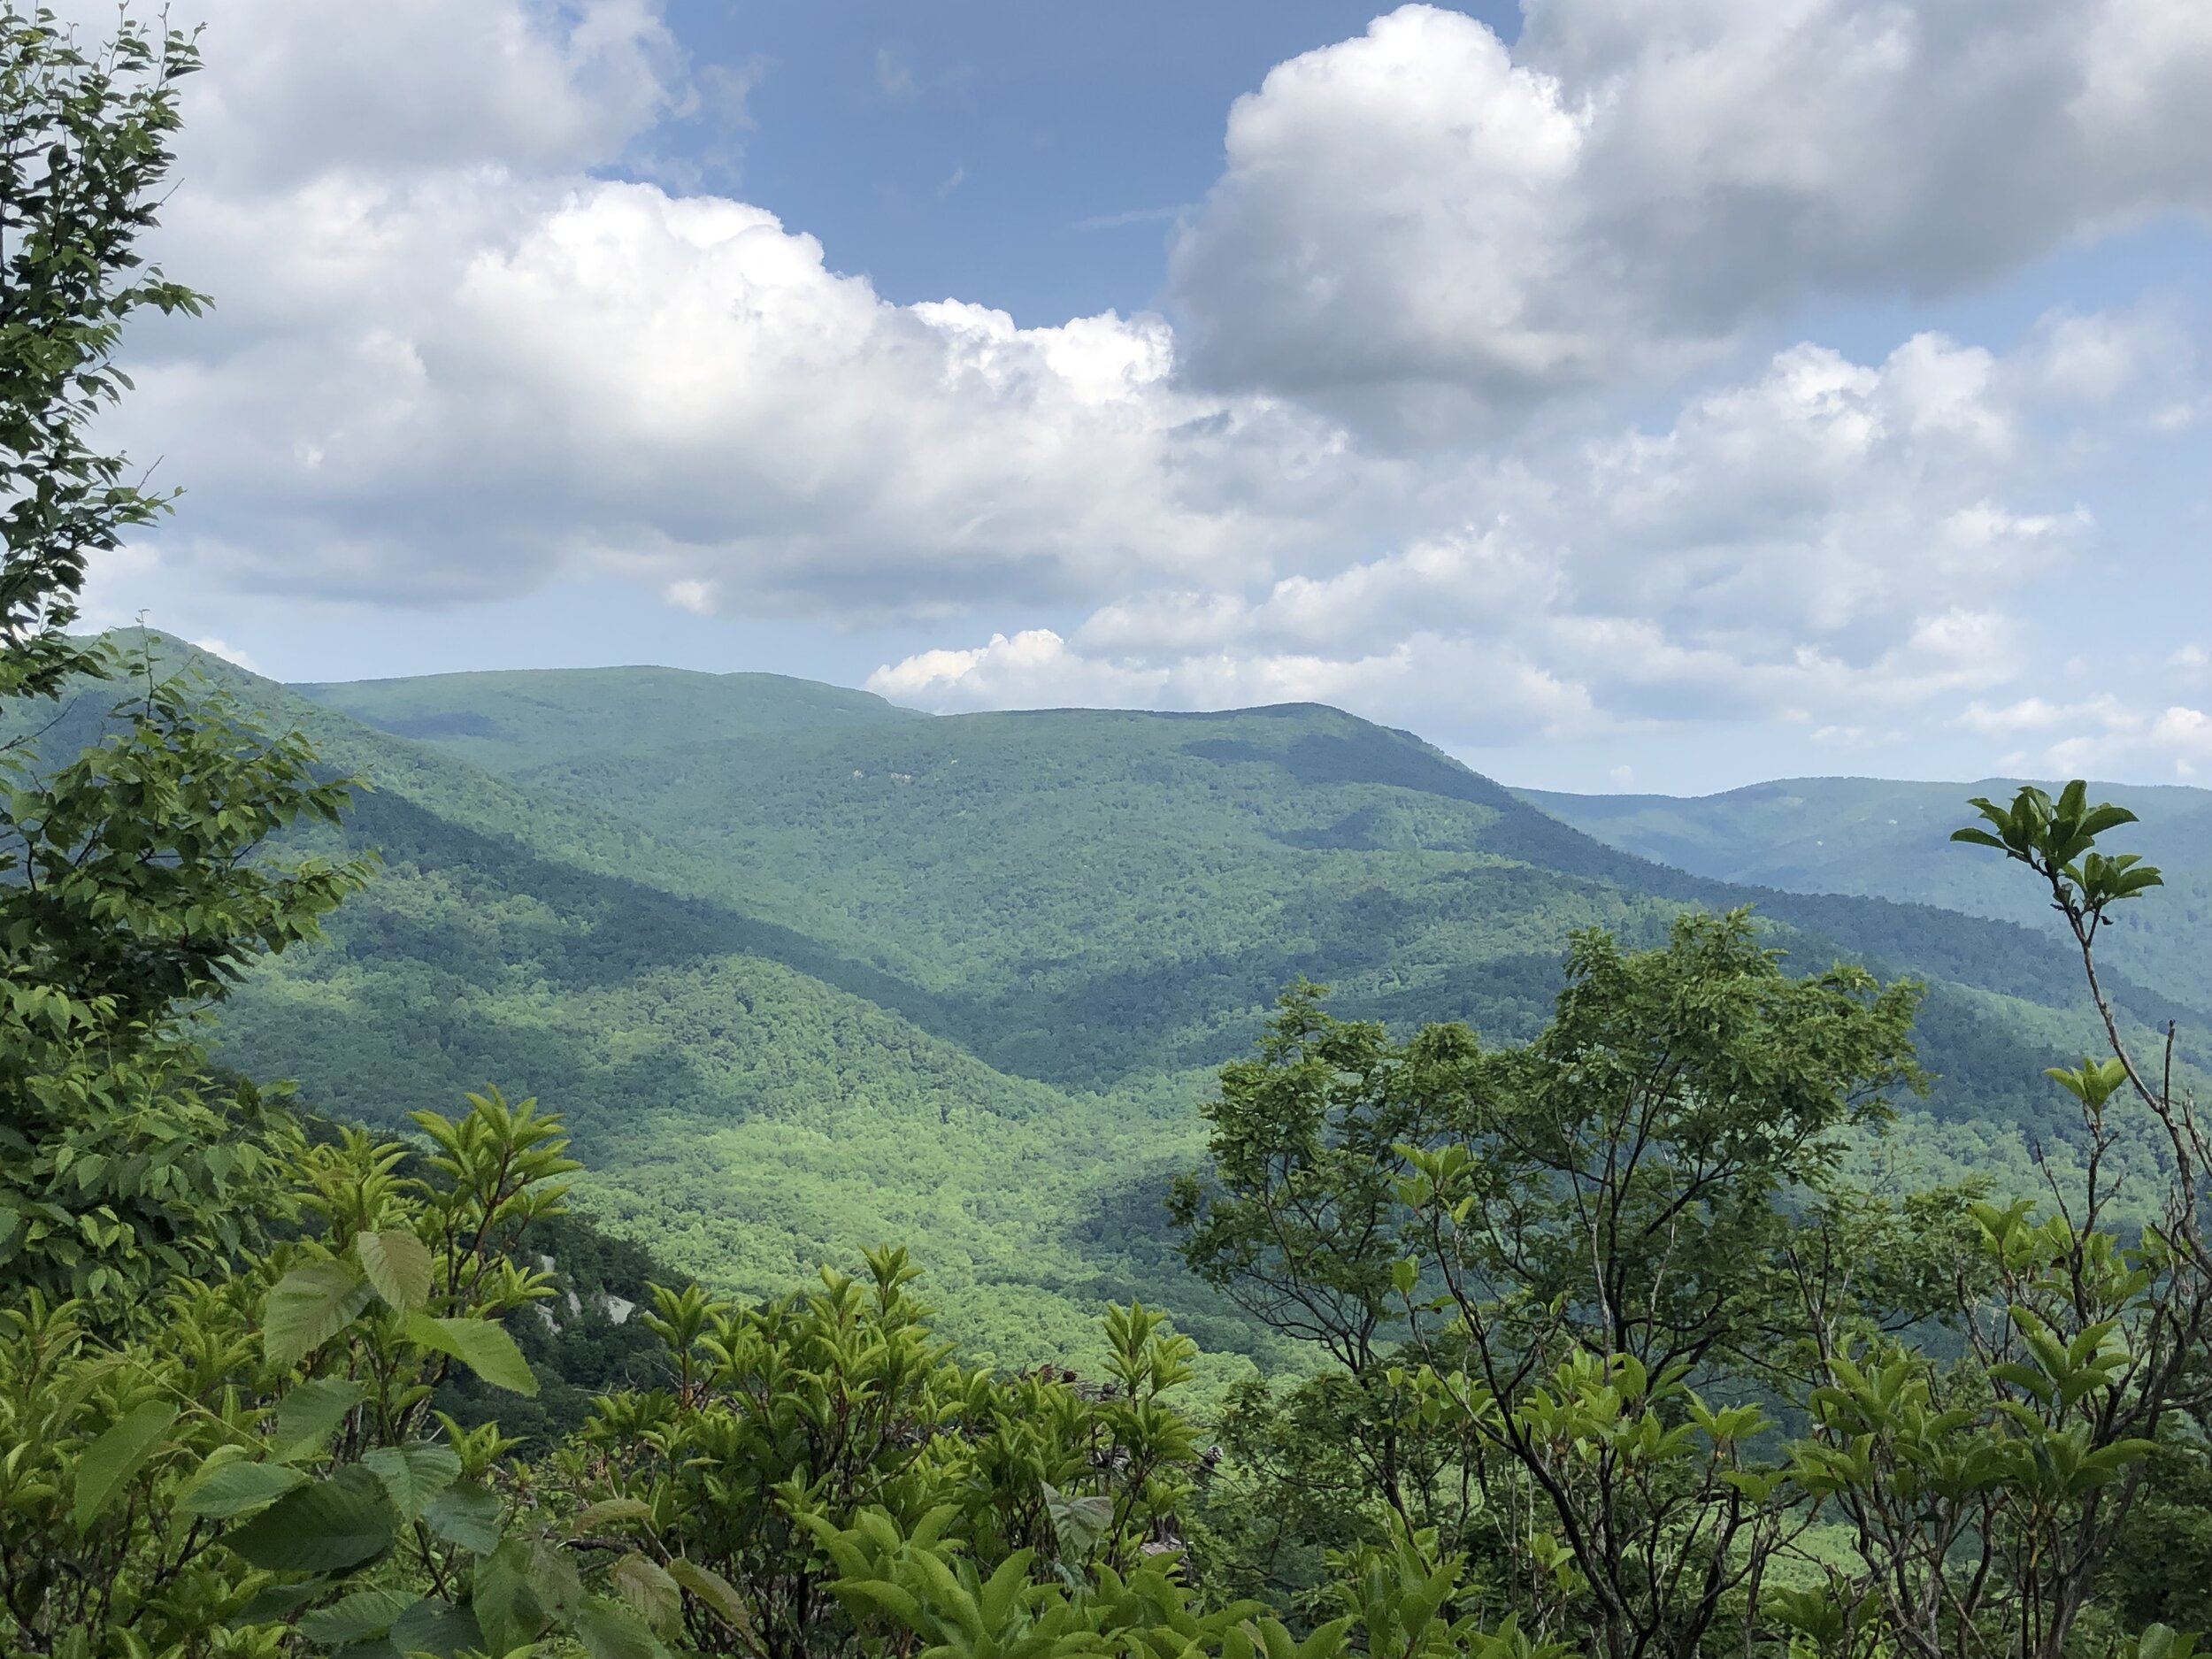 Hawksbill Mountain, the tallest in the park, offers classic Shenandoah views.